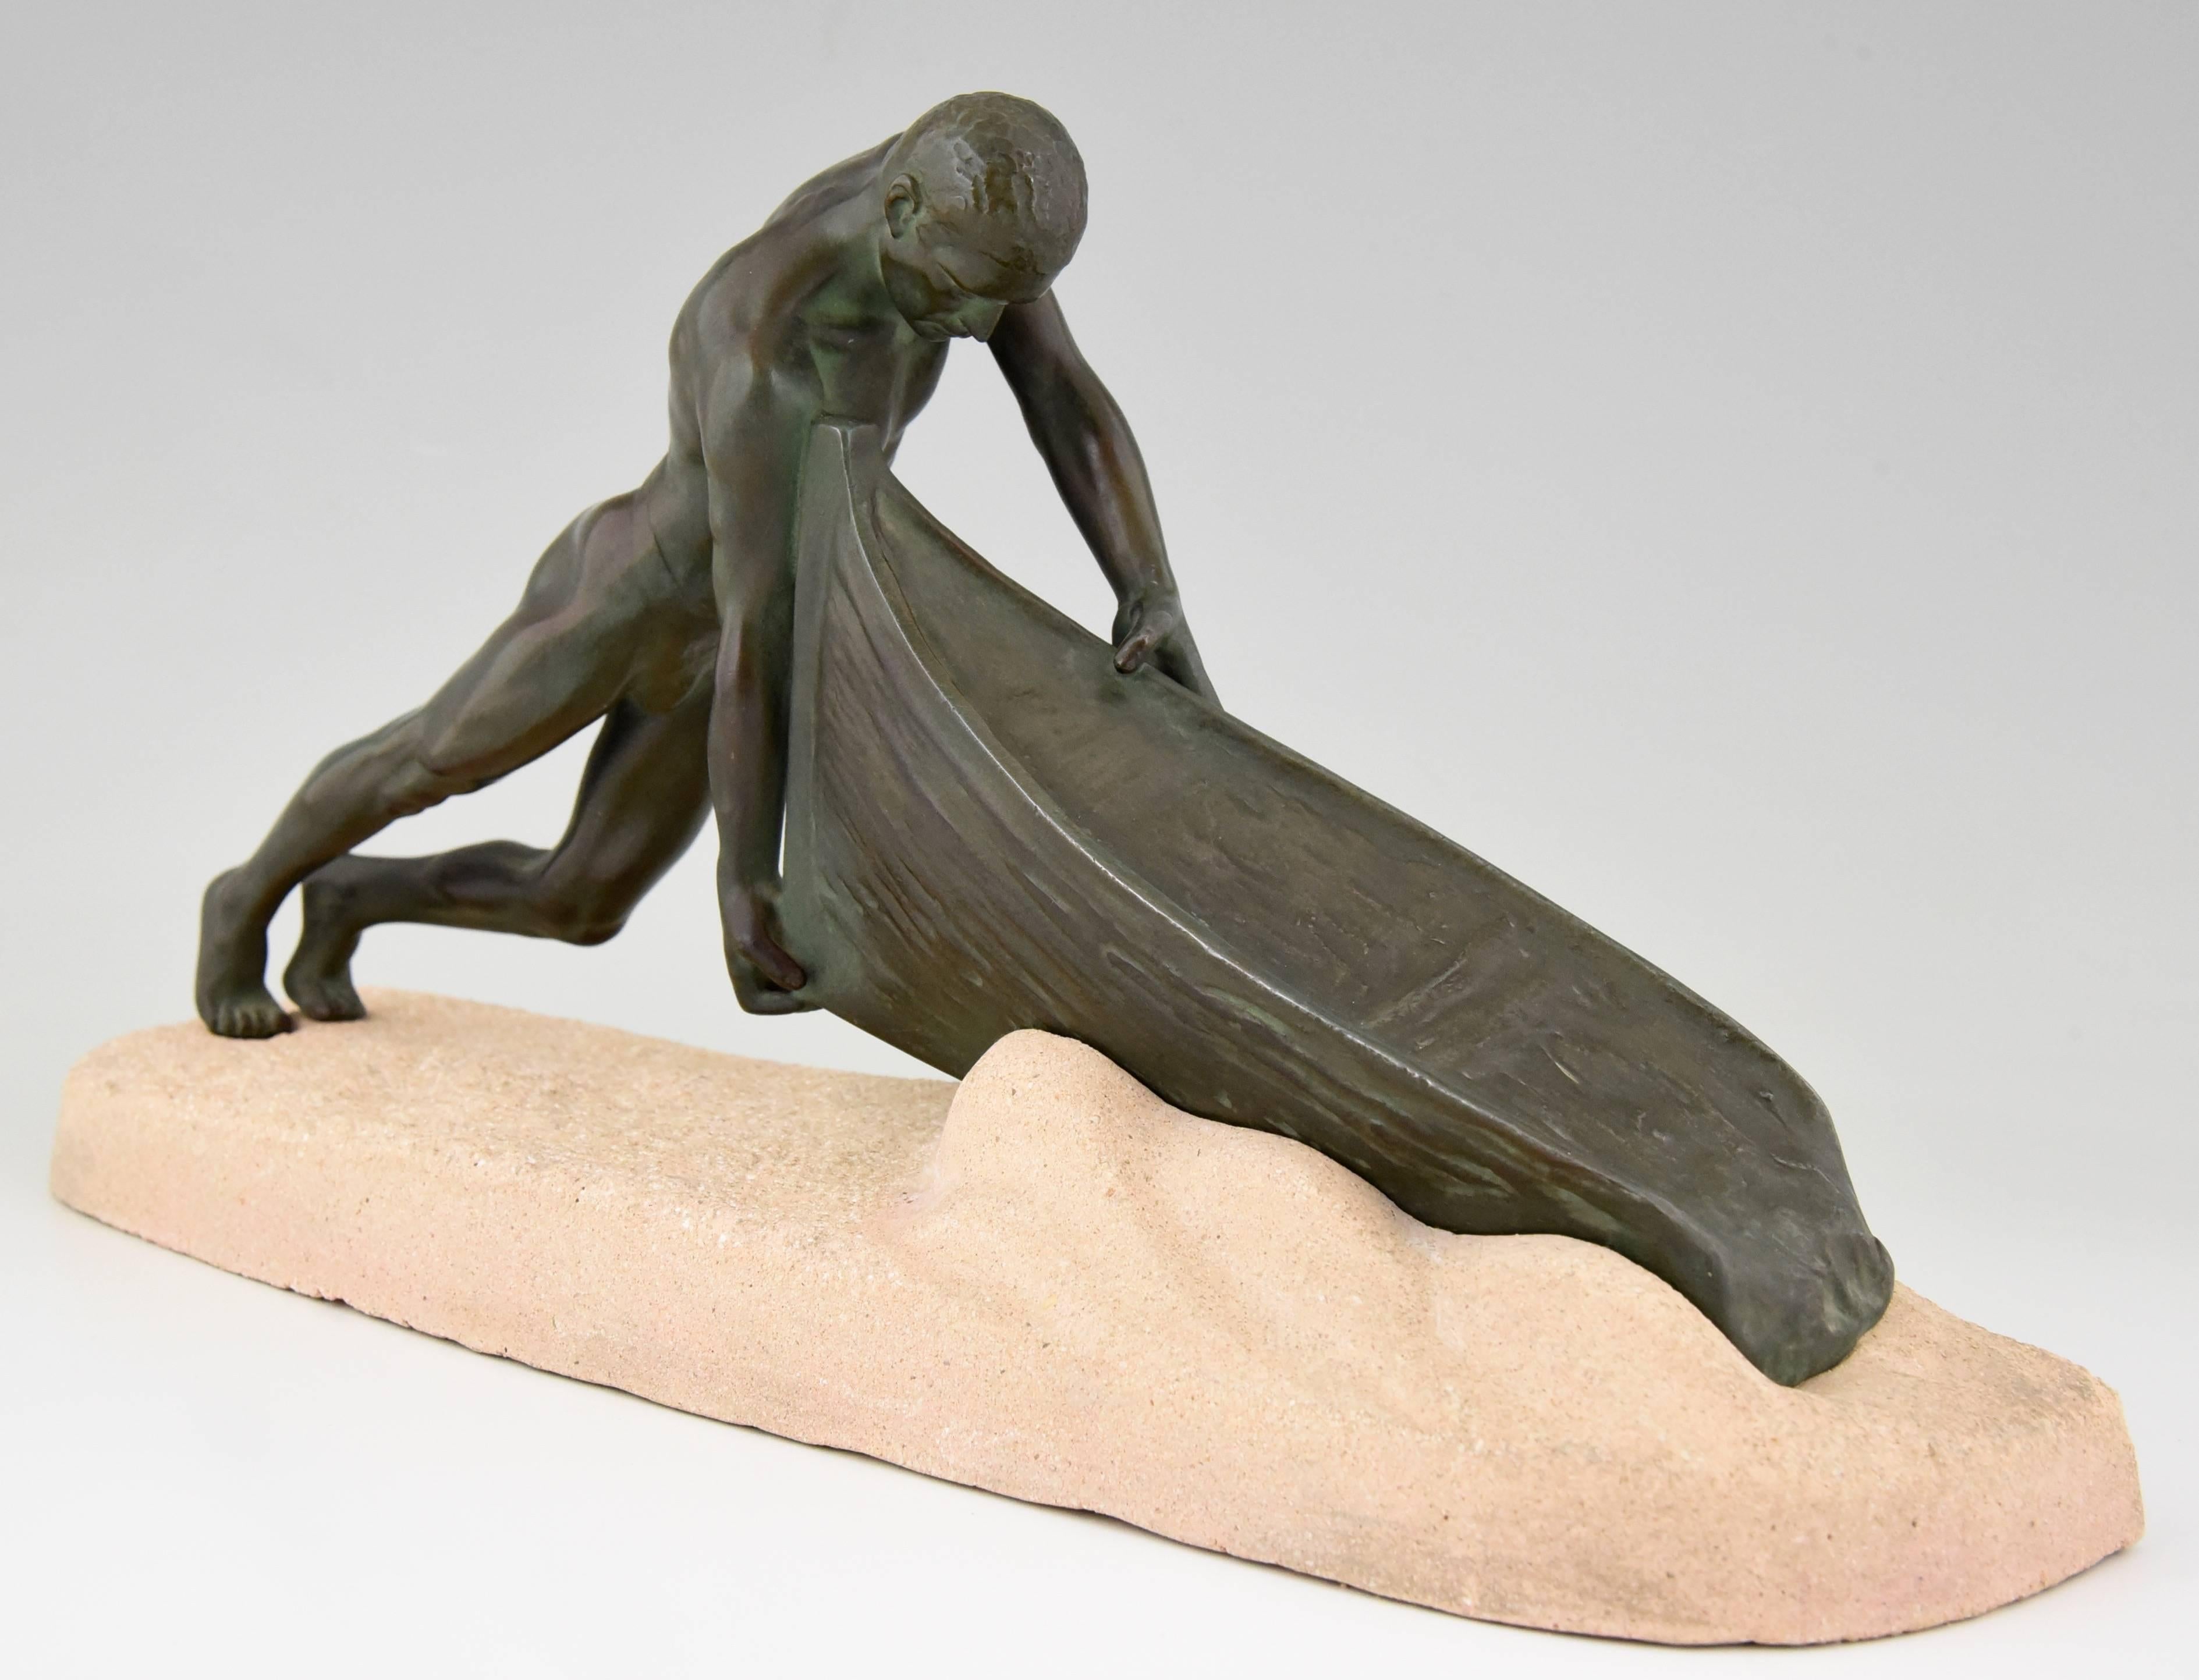 Hard to find sculpture of a fisherman pushing his boat into the water by Max Le Verrier on a carved stone base.

Artist / maker:
Max Le Verrier.
Signature / marks:
M. Le Verrier. 
Style:
Art Deco. 
Date:
1930.
Material:
Patinated metal.